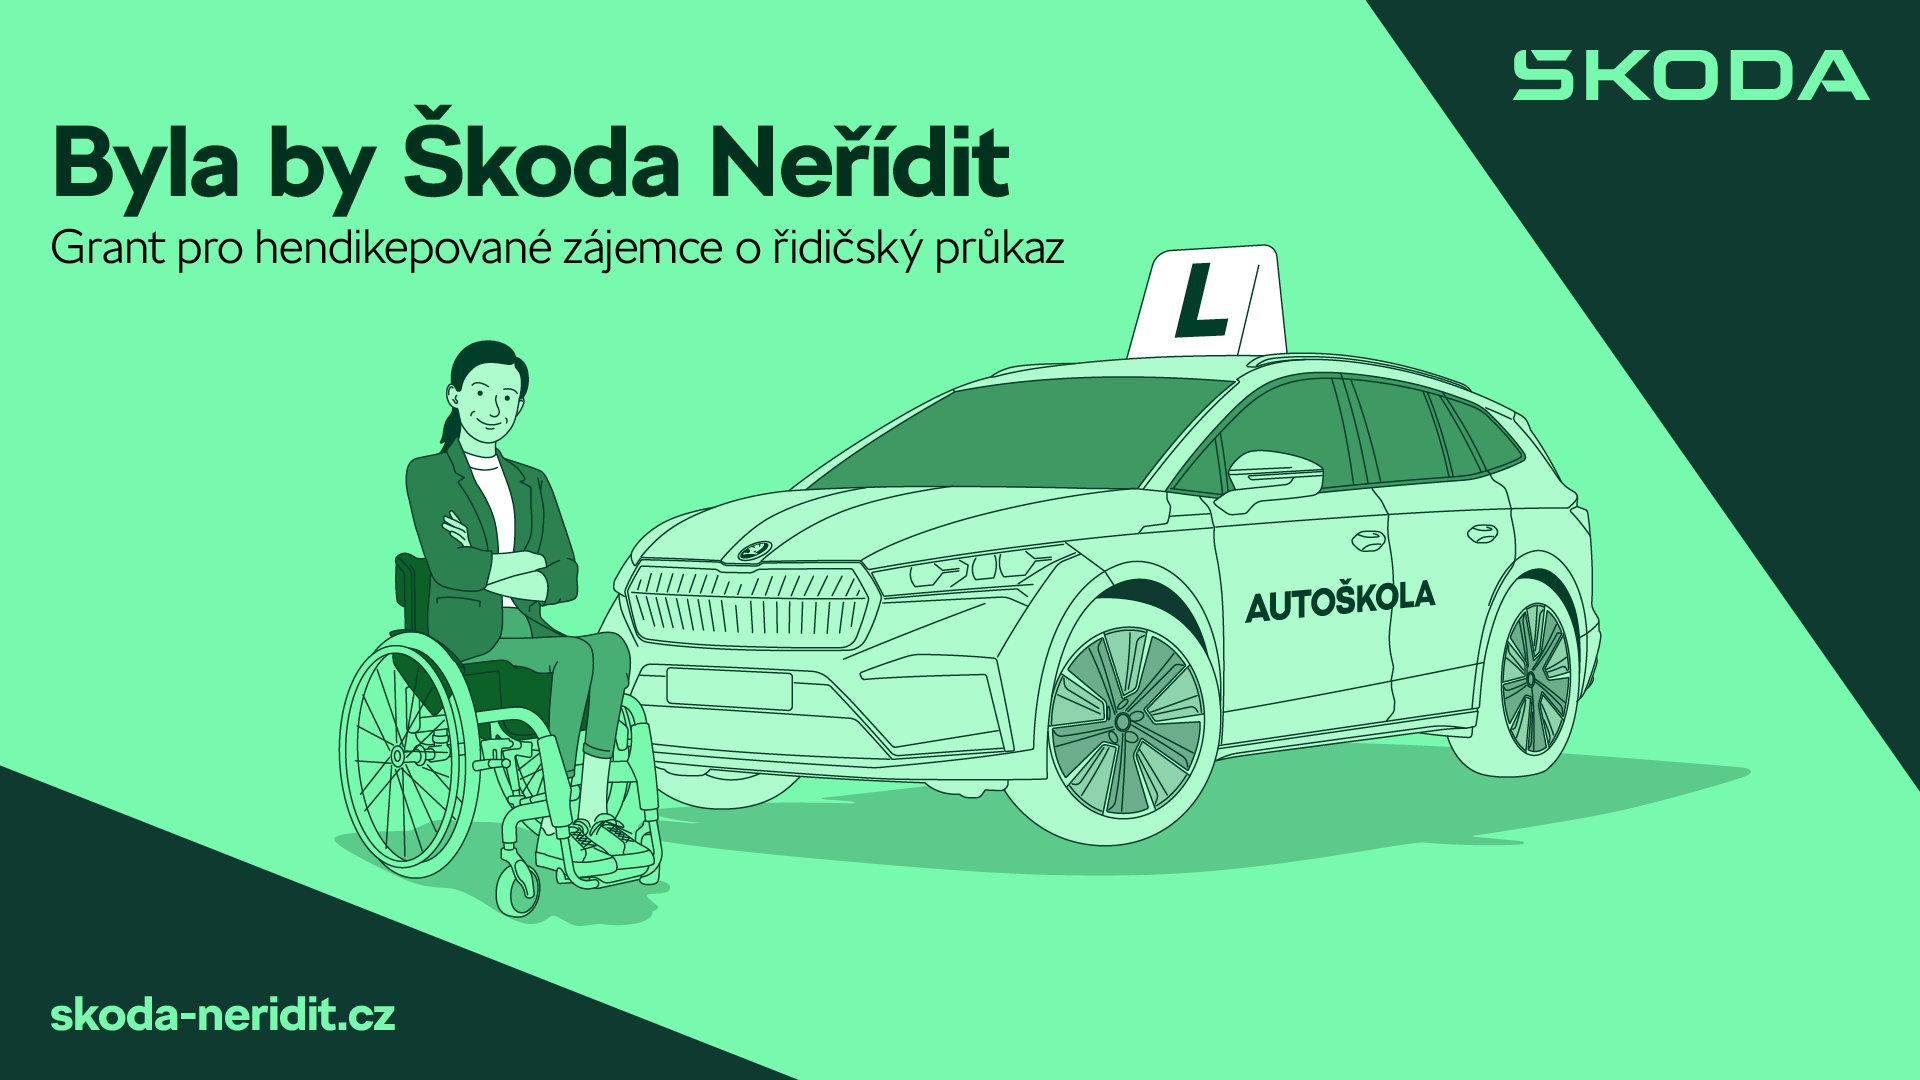 Skoda_neridit_PPT_1920x1080px_B.png